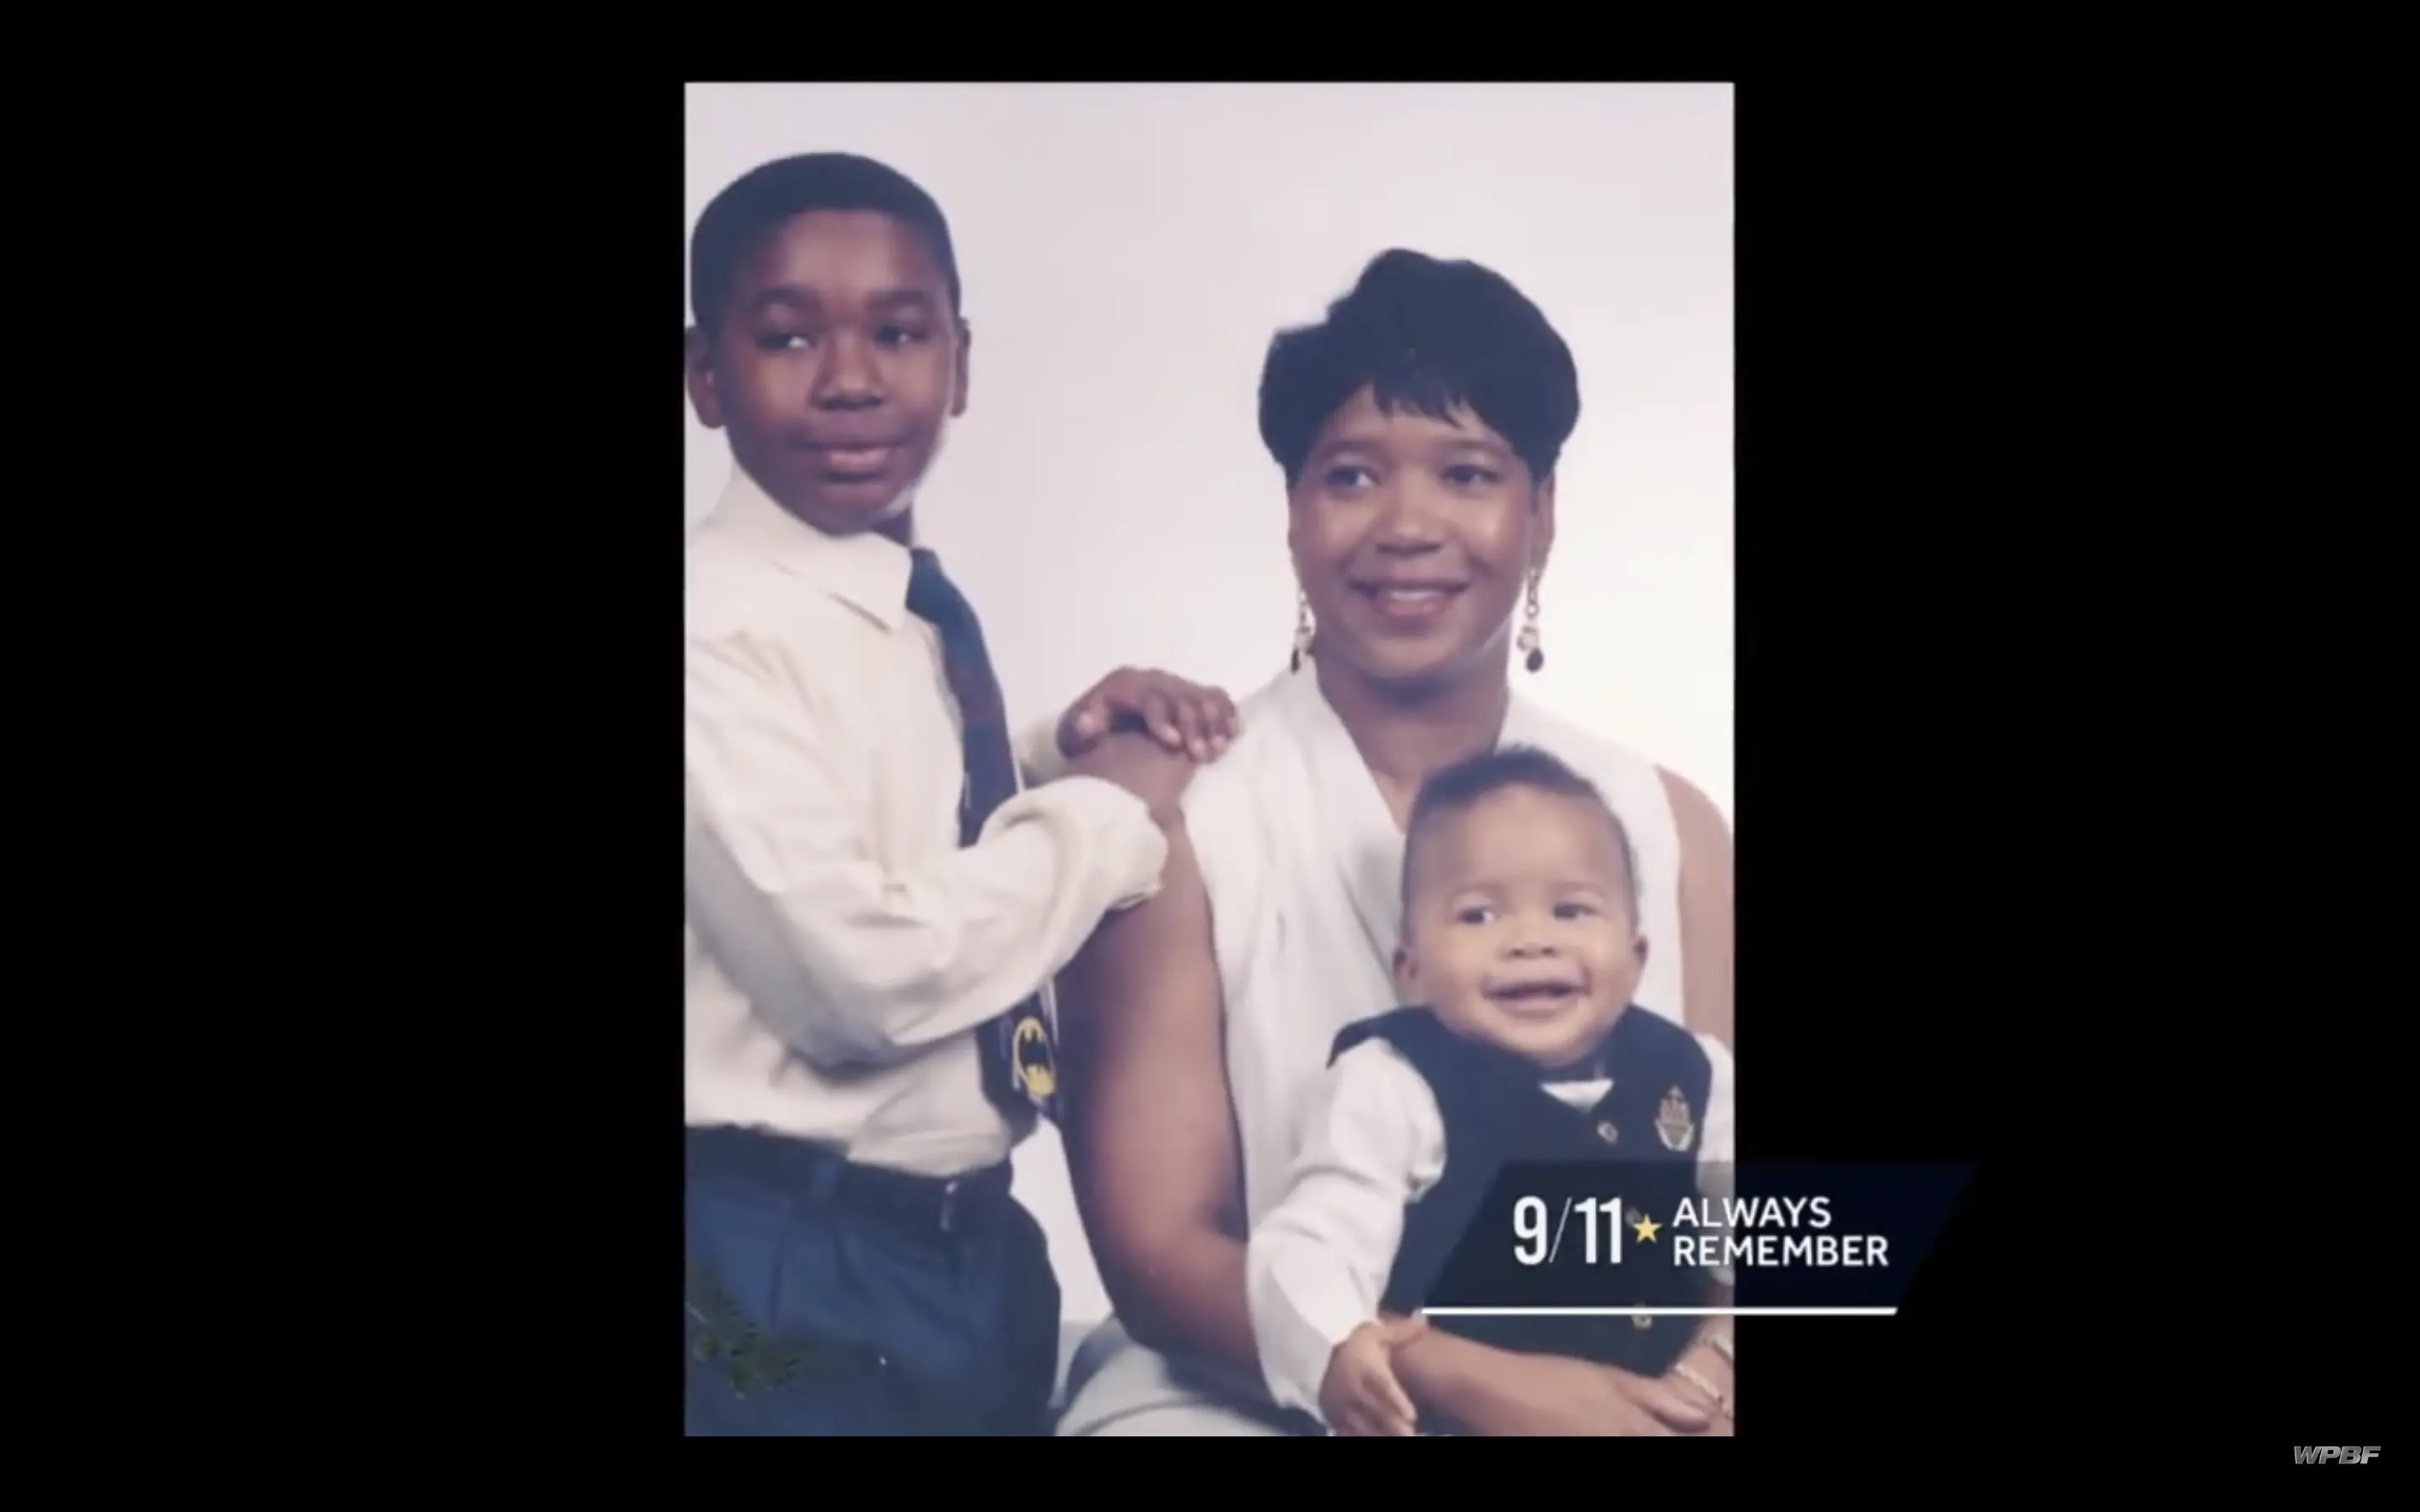 CeeCee Ross-Lyles and her sons Jerome and Jevon | Source: youtube.com/@WPBF